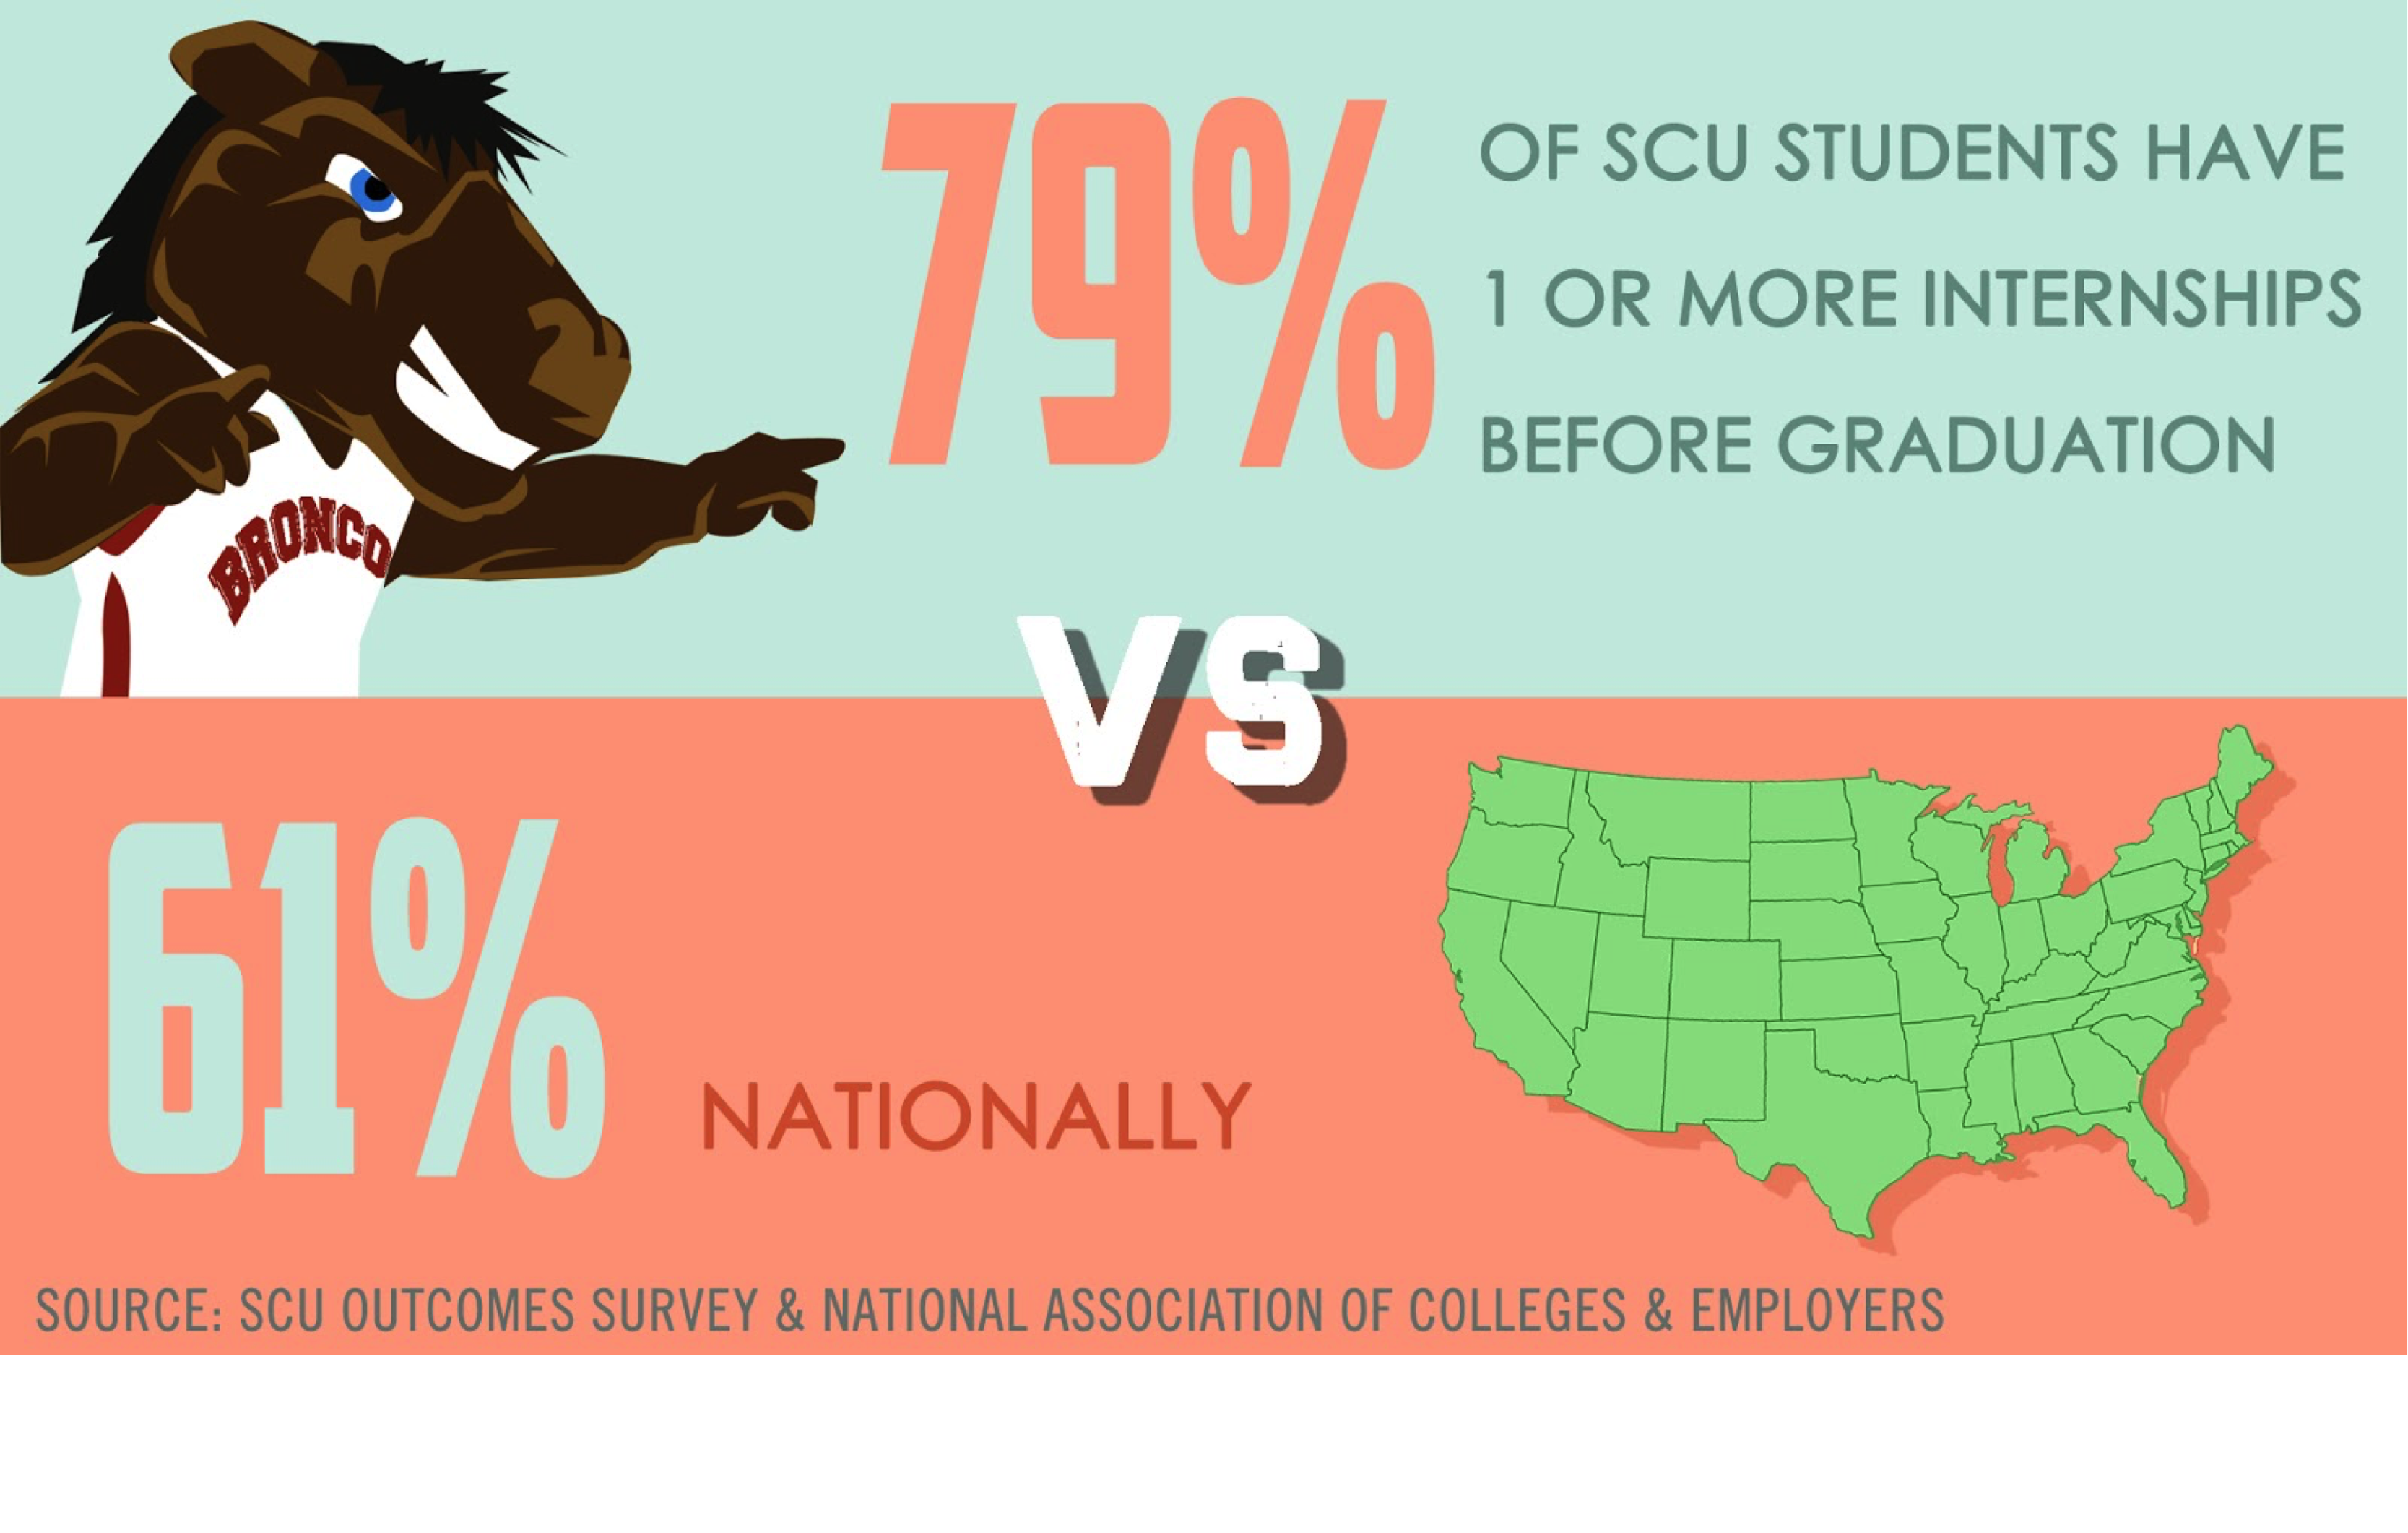 79% of SCU students have one or more internships before graduation versus 61% nationally